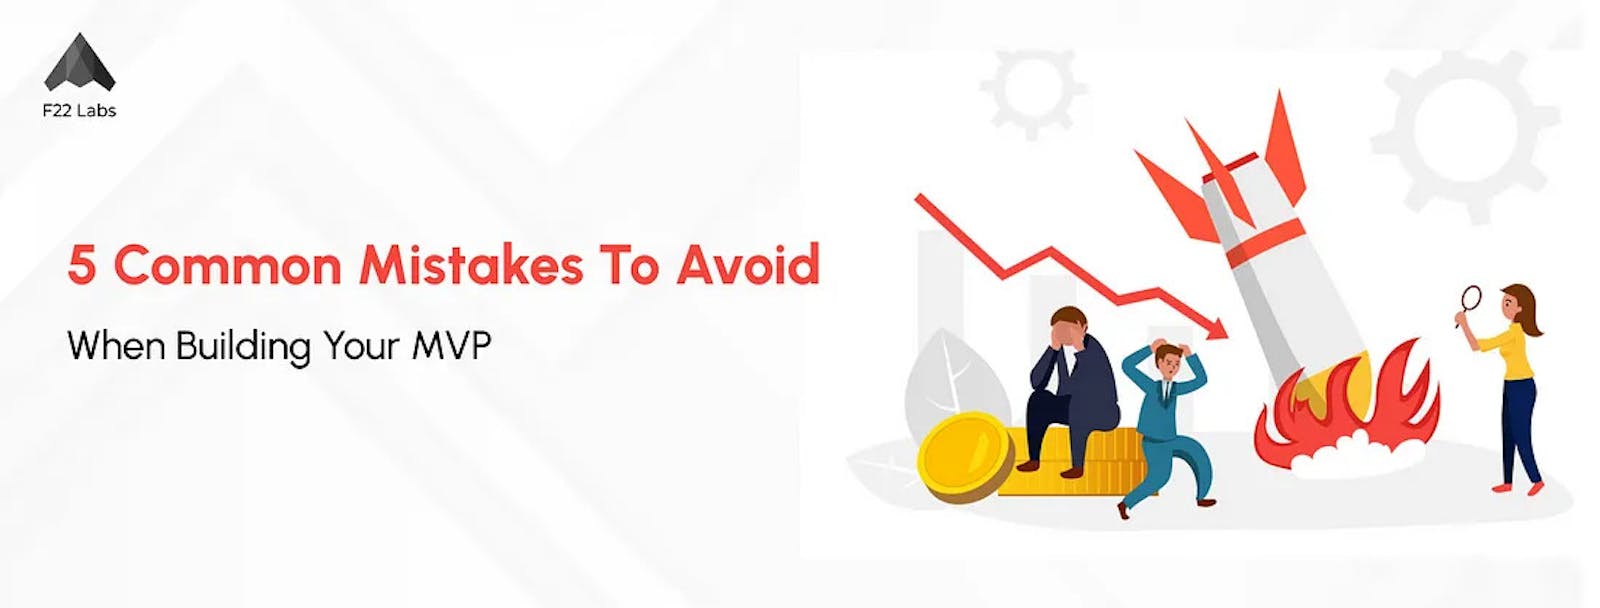 5 Common Mistakes To Avoid When Building Your MVP